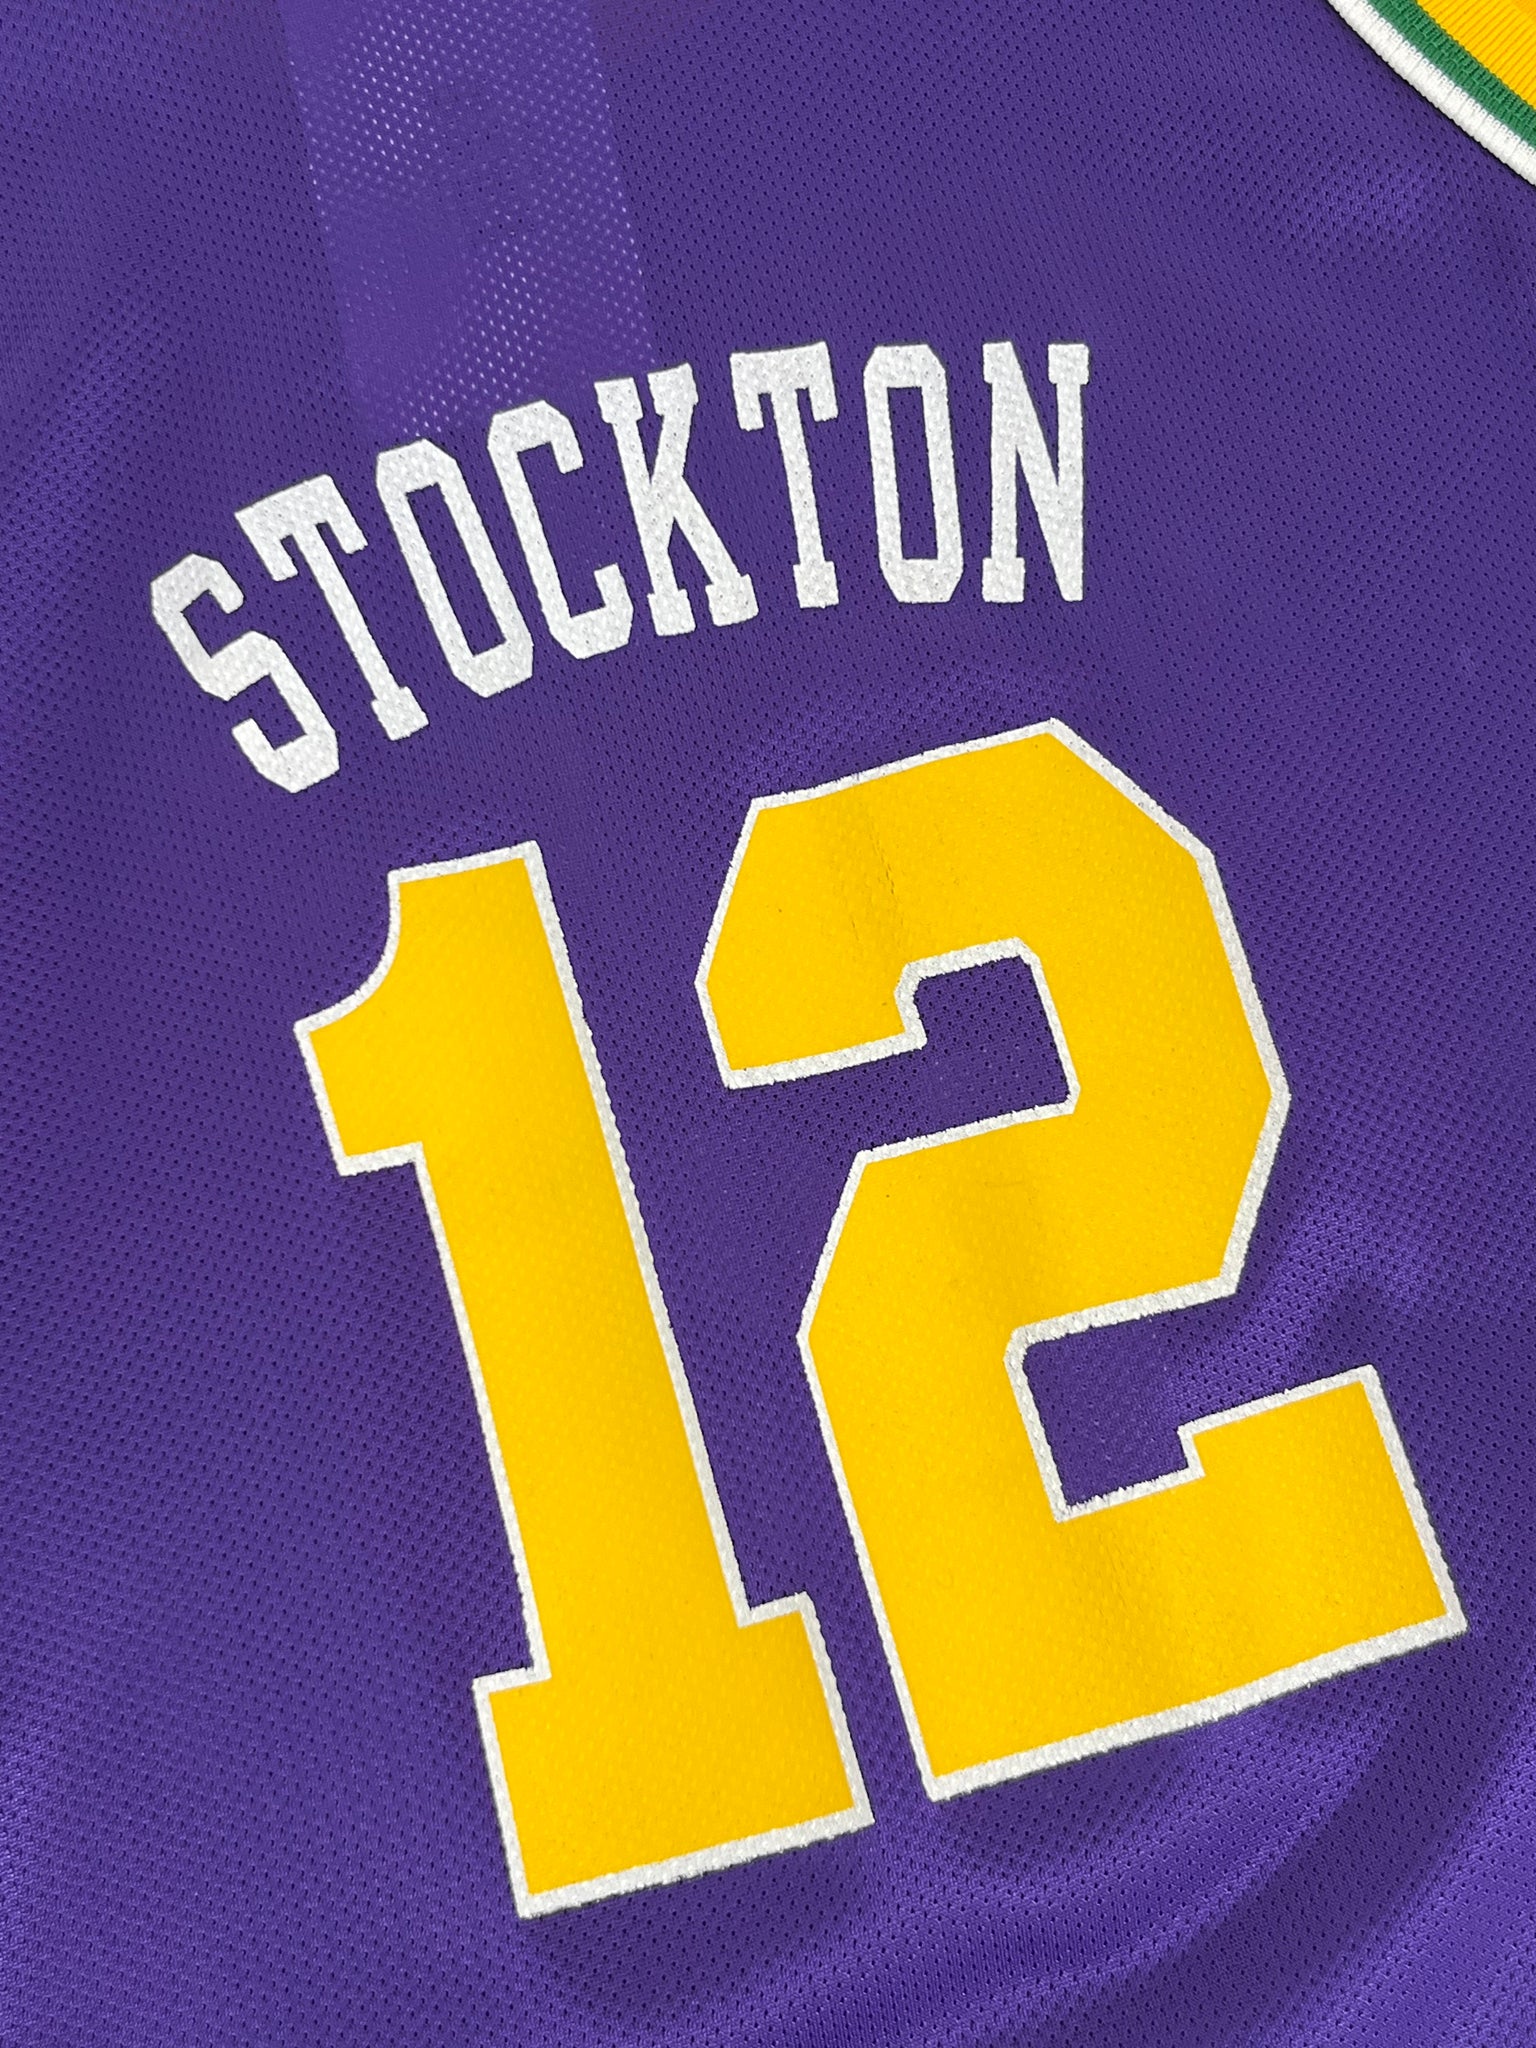 Wholesale Vintage Jazz No. 12 STOCKTON Purple jersey high quality  embroidered mesh speed dry basketball jersey From m.